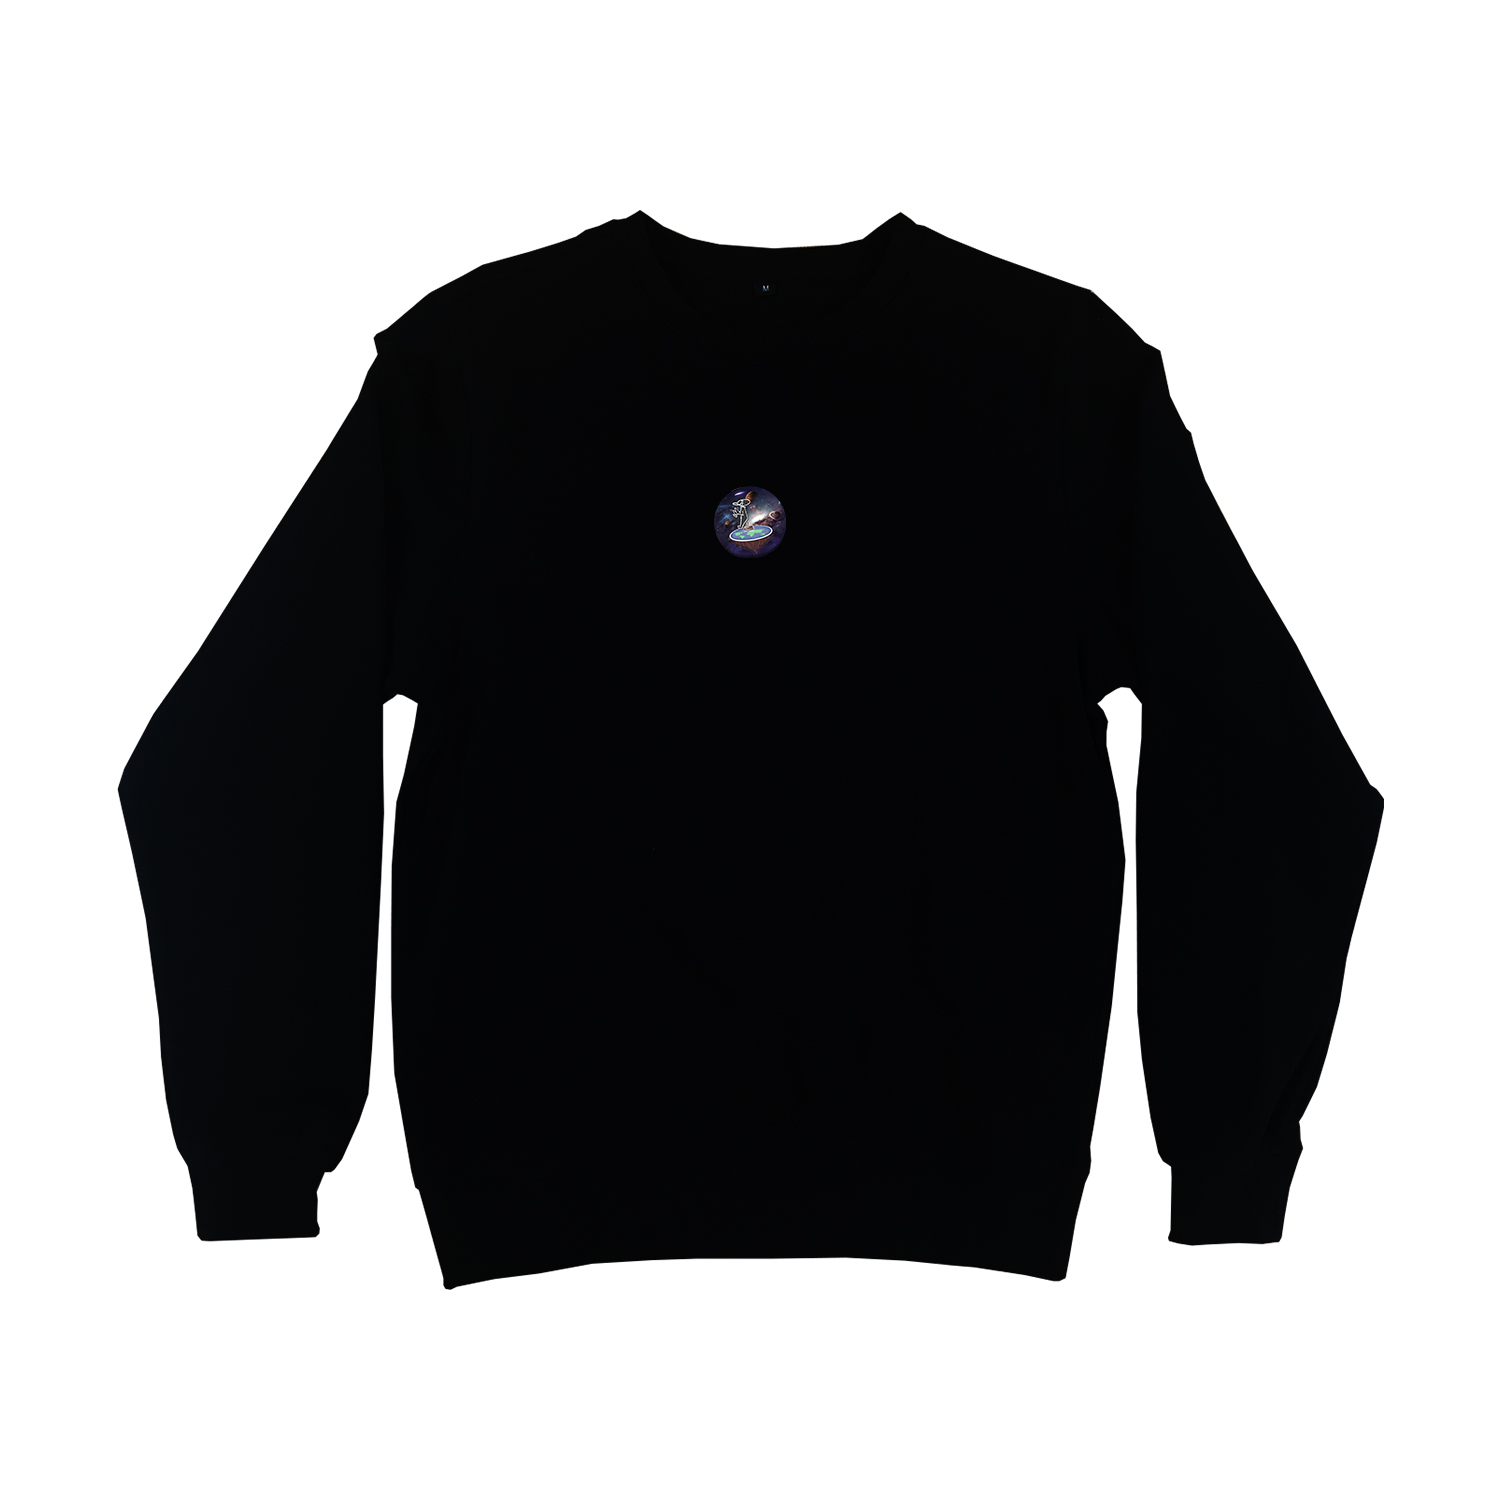 Sweater - zwart - voor - FLAT EARTH SHITTING by Tim Haars - ONE AND ONE MAKES TWO